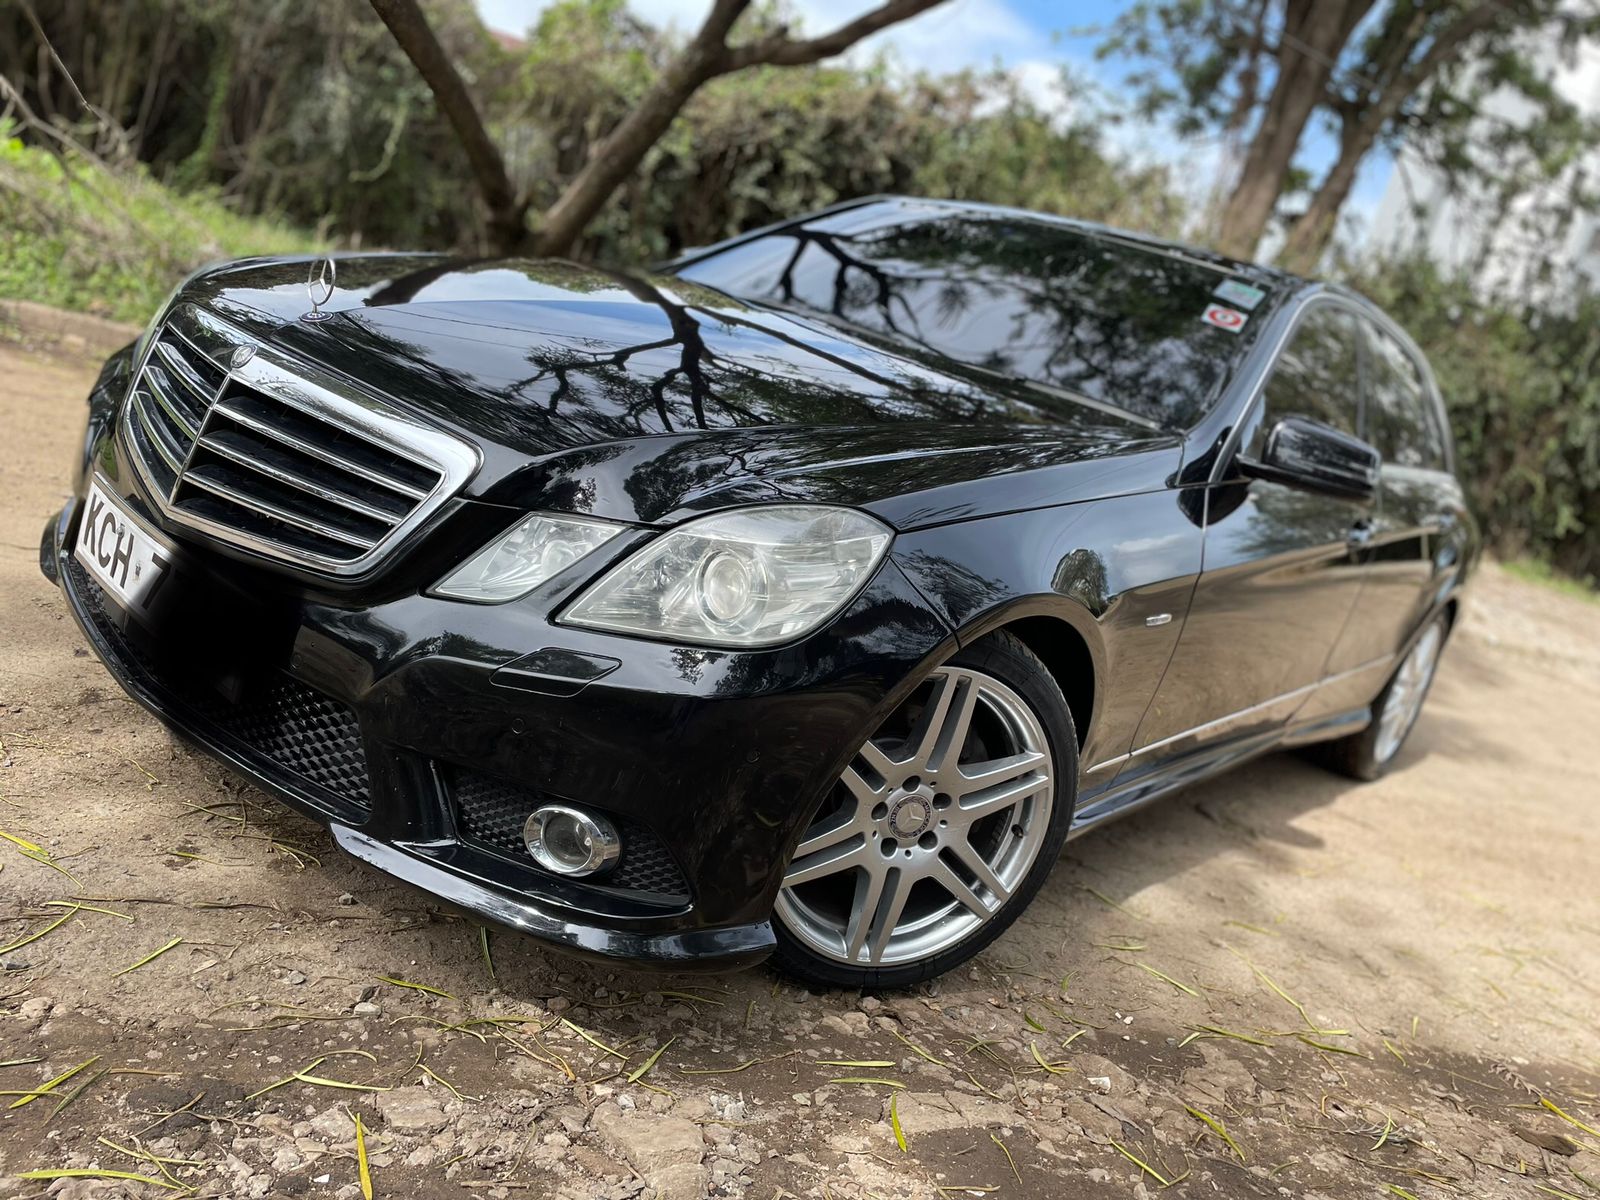 Mercedes Benz E250 Triple SUNROOF Cheapest You Pay 30% DEPOSIT Trade in OK